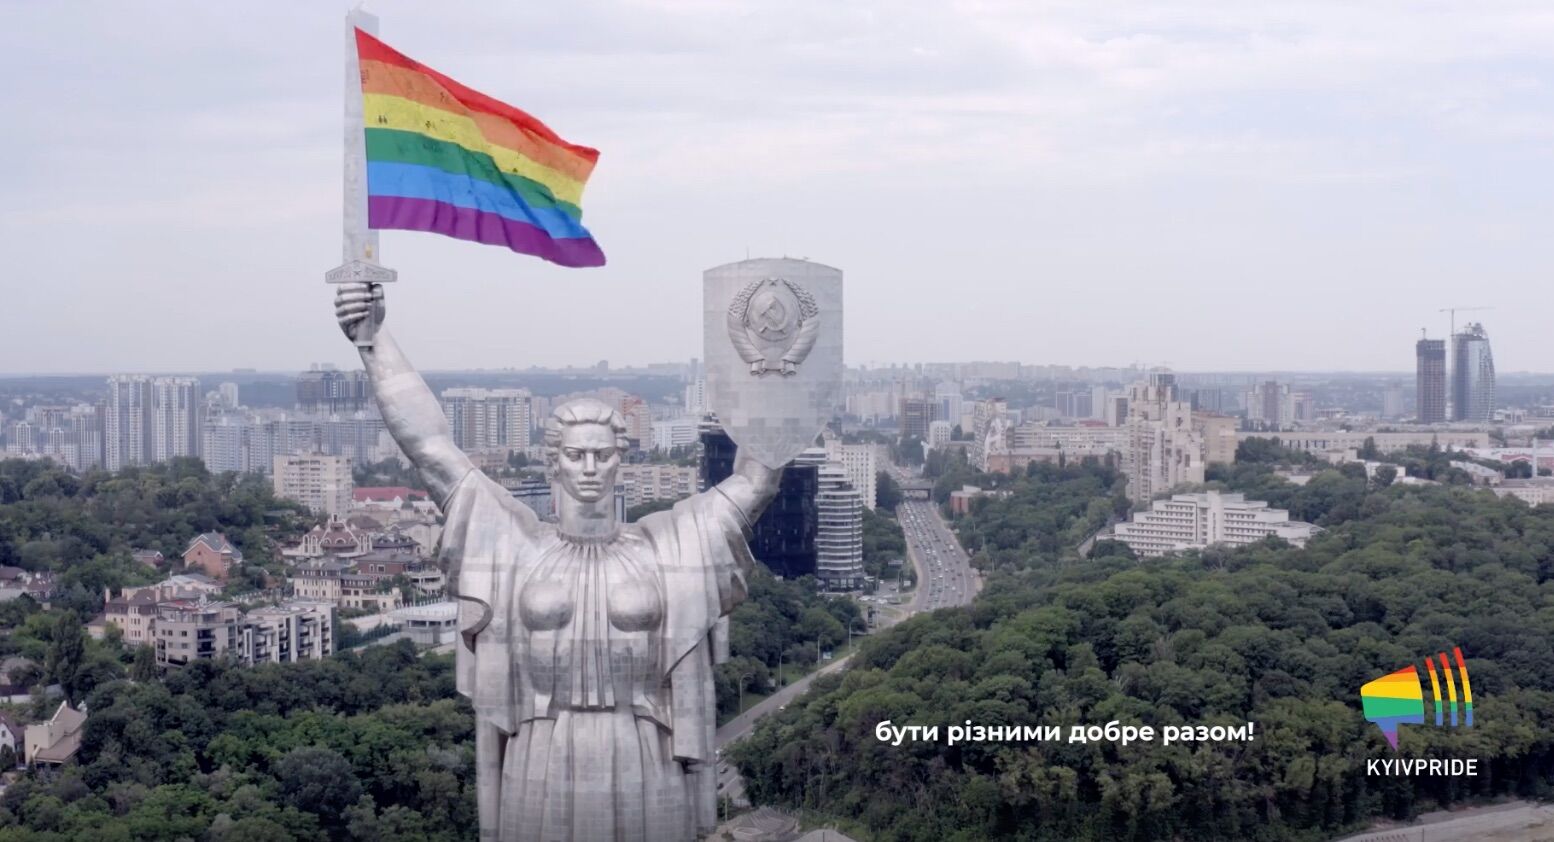 The "Motherland" statue in Kyiv sports a rainbow flag for Pride